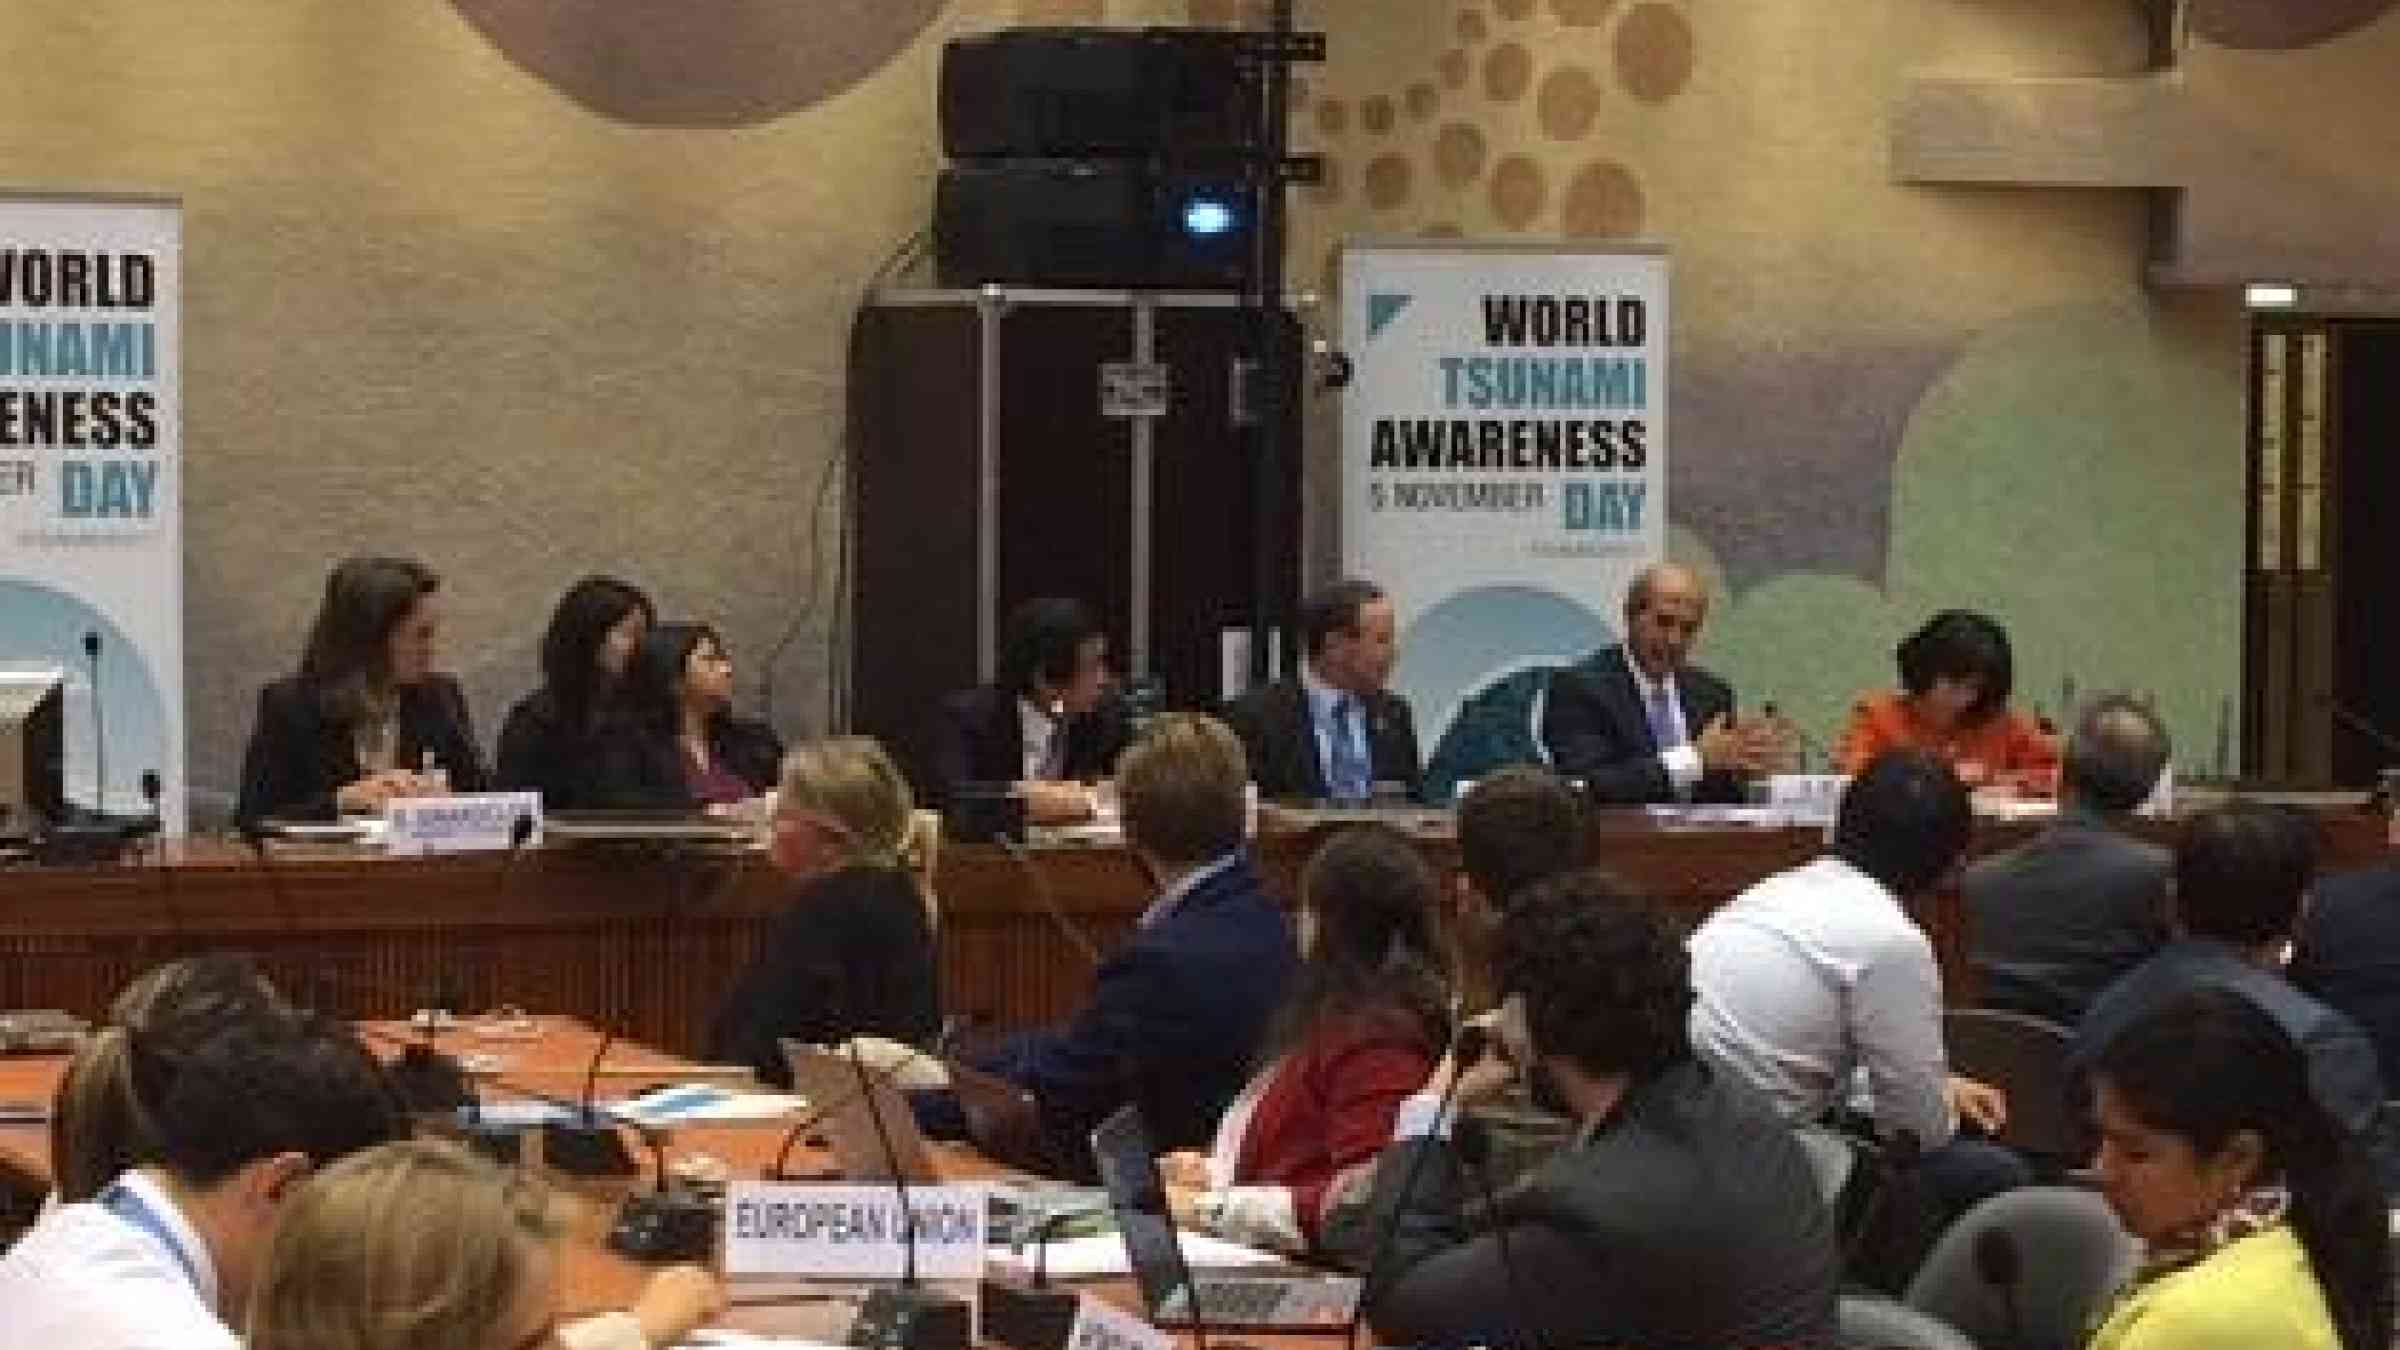 The panel at today's discussion on World Tsunami Awareness Day at the UN in Geneva